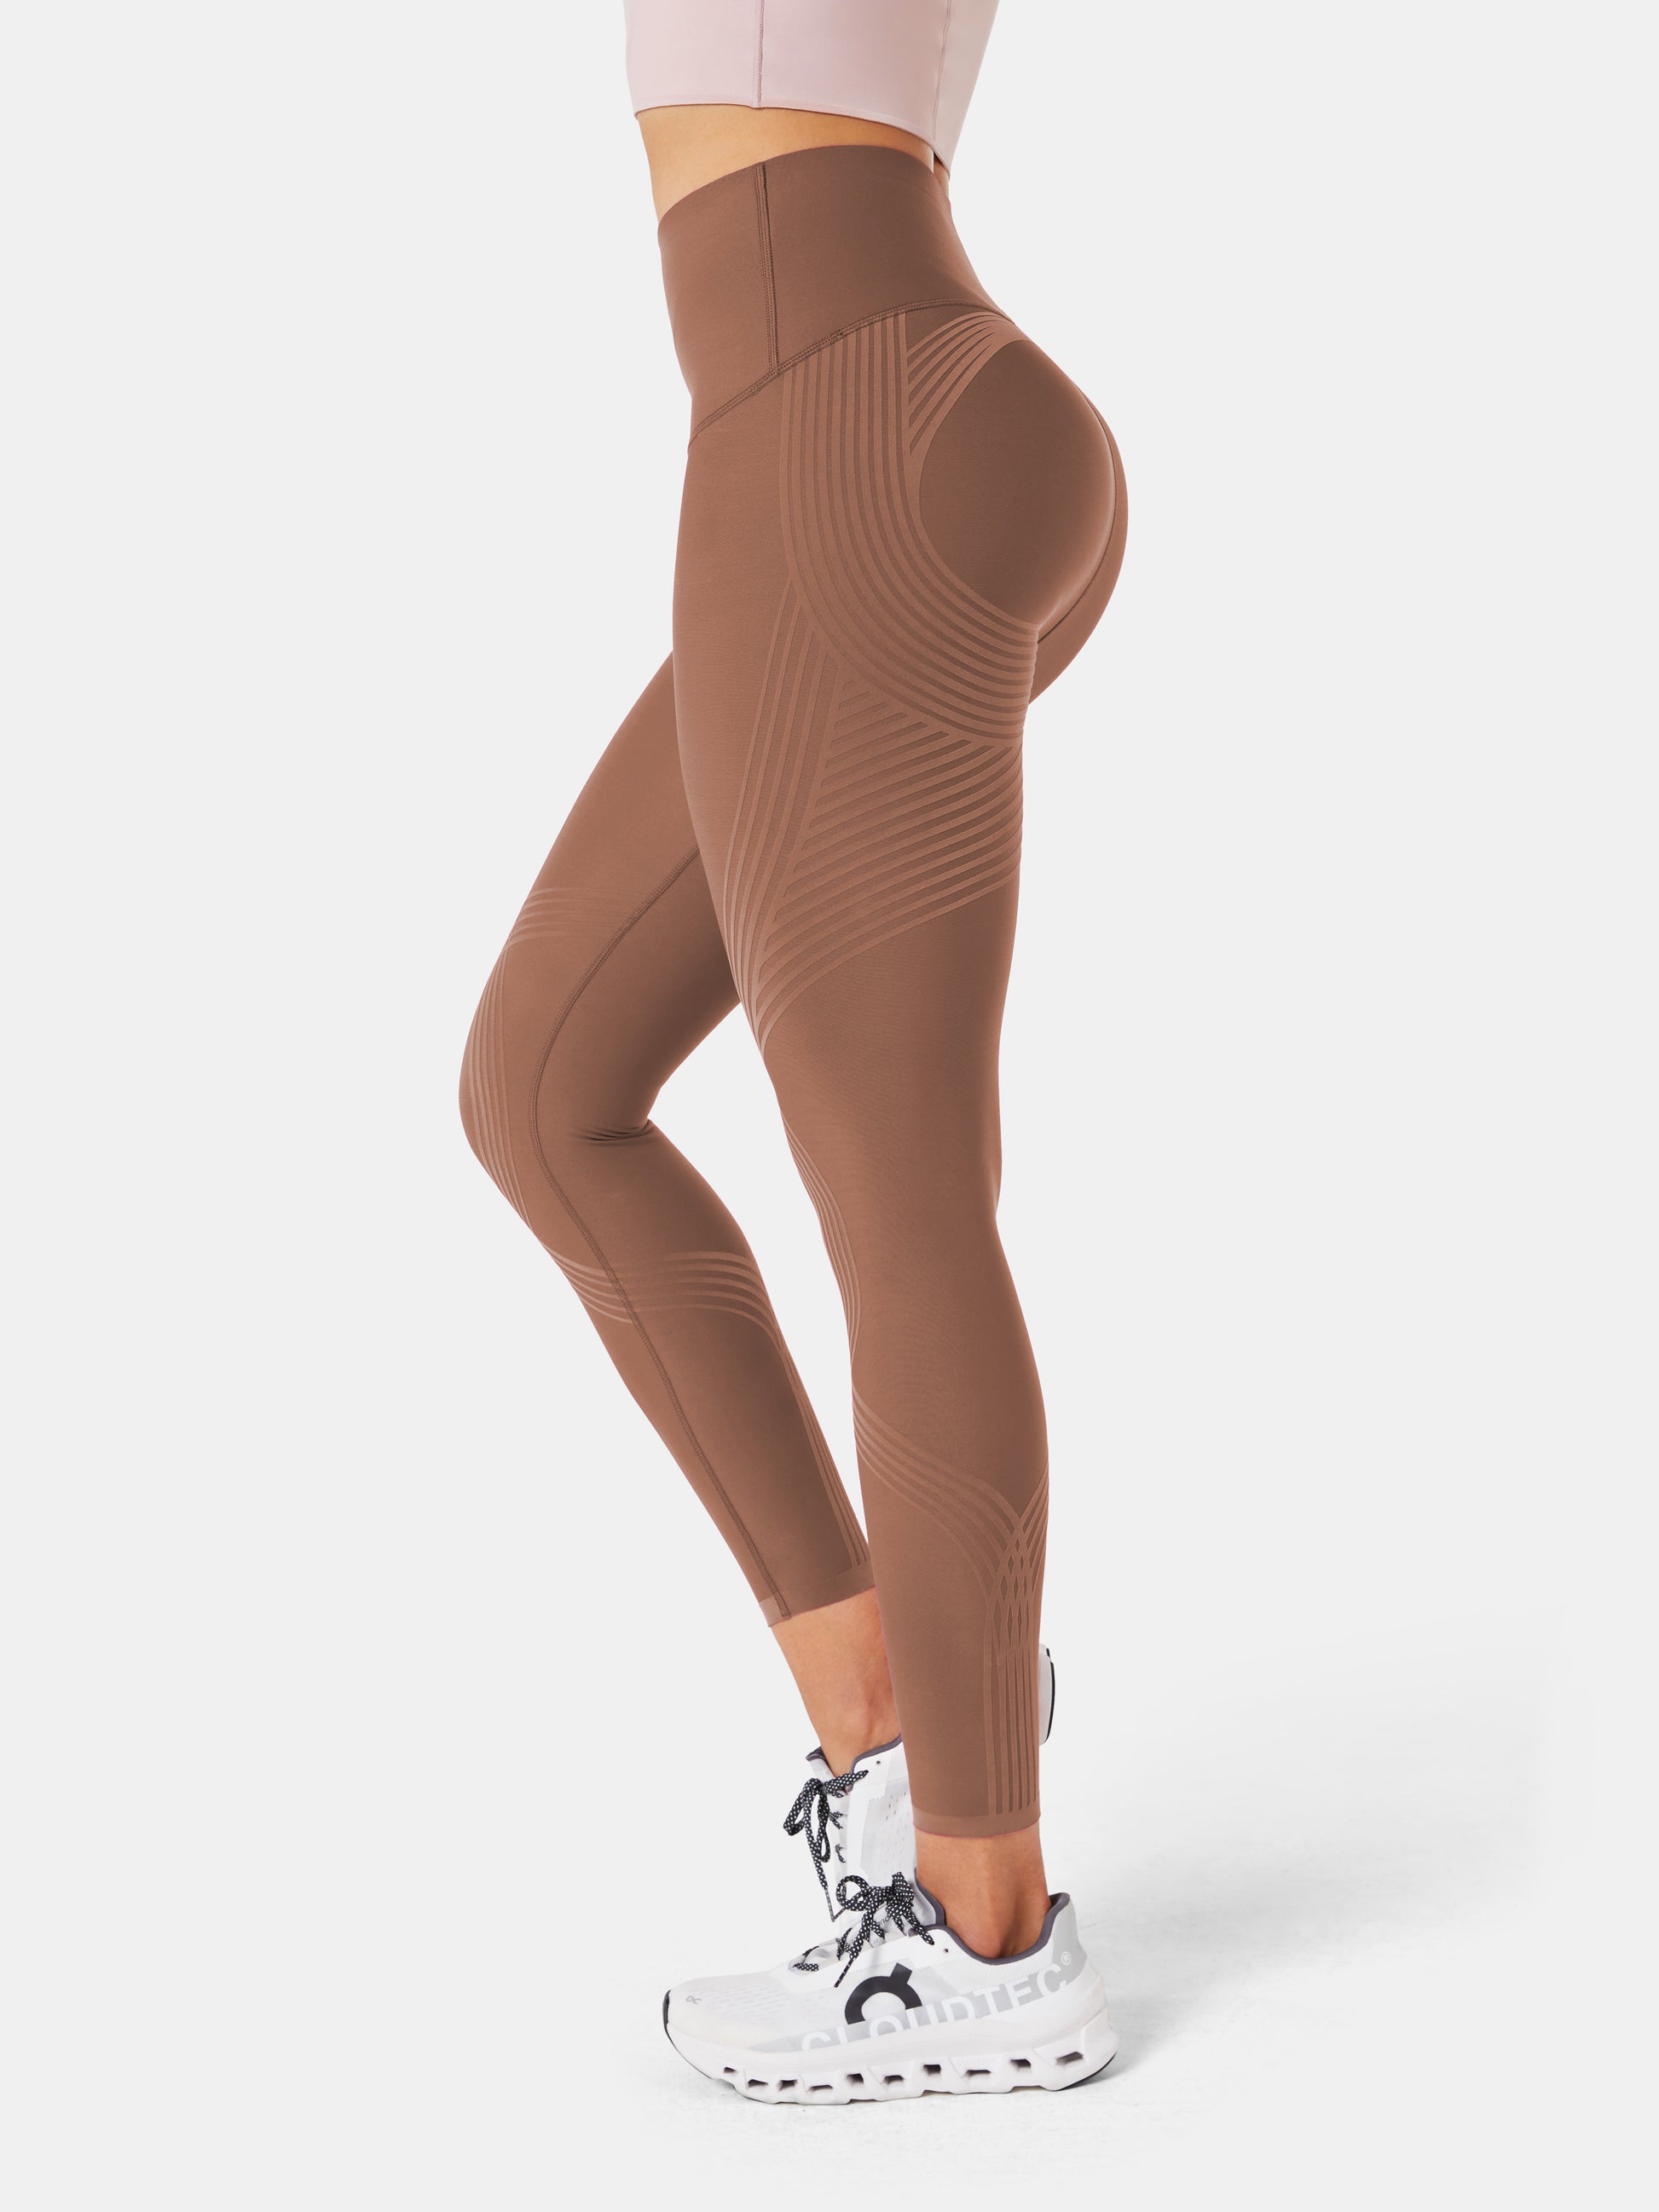 Night Runners Love These Reflective Leggings, They Have a Secret Pocke –  Fanka